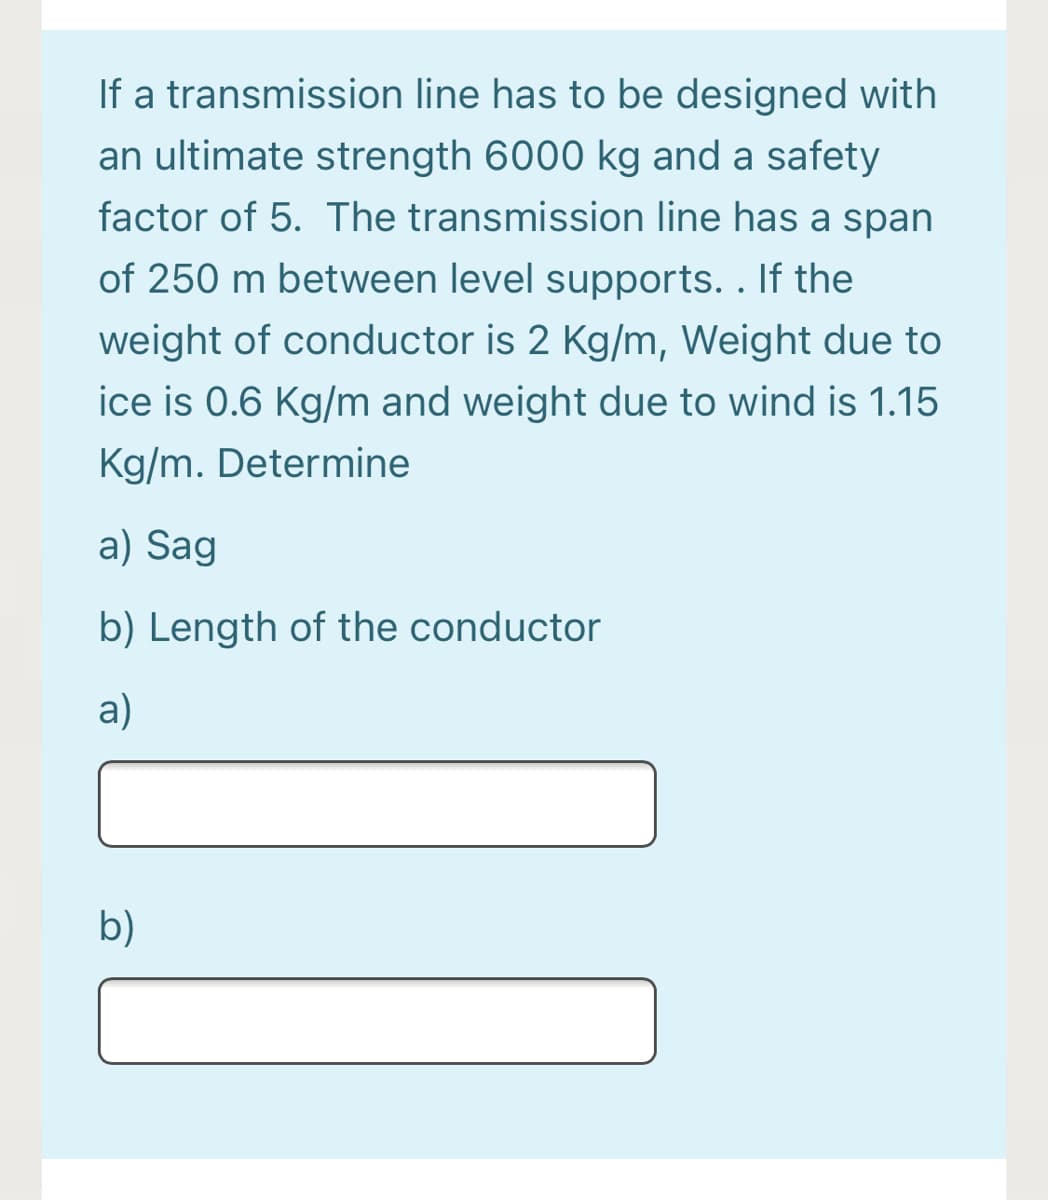 If a transmission line has to be designed with
an ultimate strength 6000 kg and a safety
factor of 5. The transmission line has a span
of 250 m between level supports. . If the
weight of conductor is 2 Kg/m, Weight due to
ice is 0.6 Kg/m and weight due to wind is 1.15
Kg/m. Determine
a) Sag
b) Length of the conductor
a)
b)
